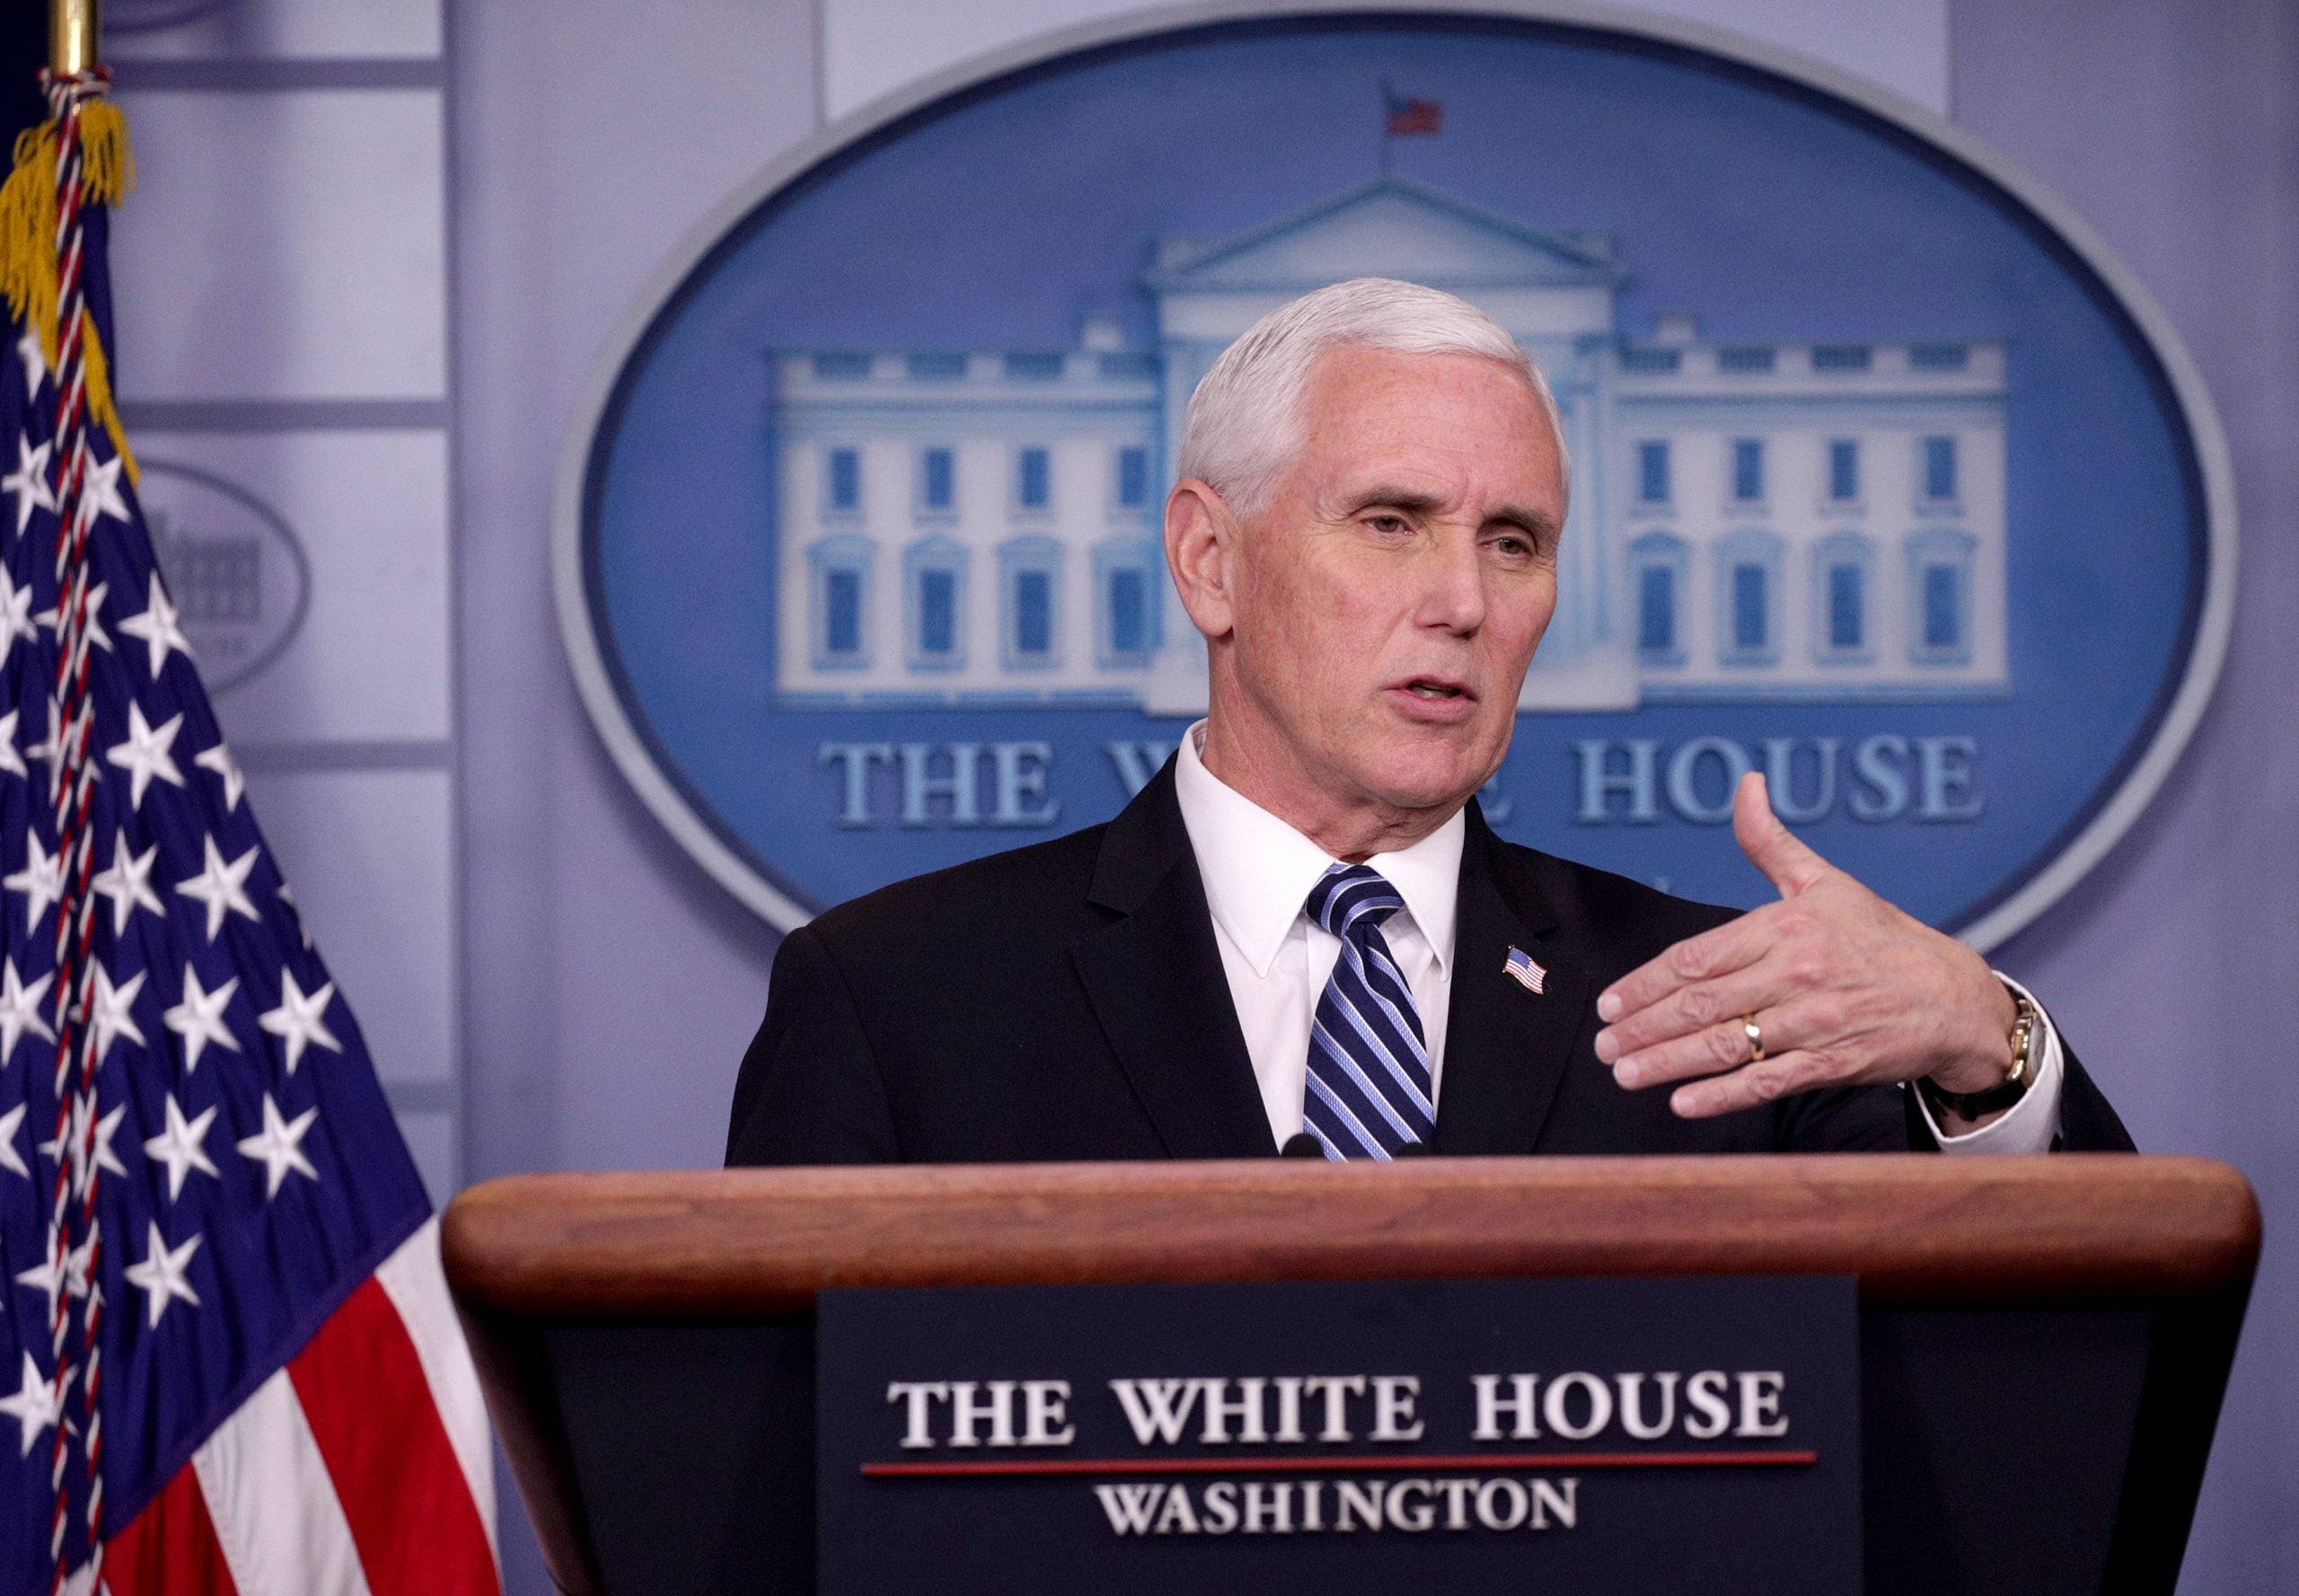 Mike Pence Reportedly Involved In Cover-up Regarding Coronavirus Cases